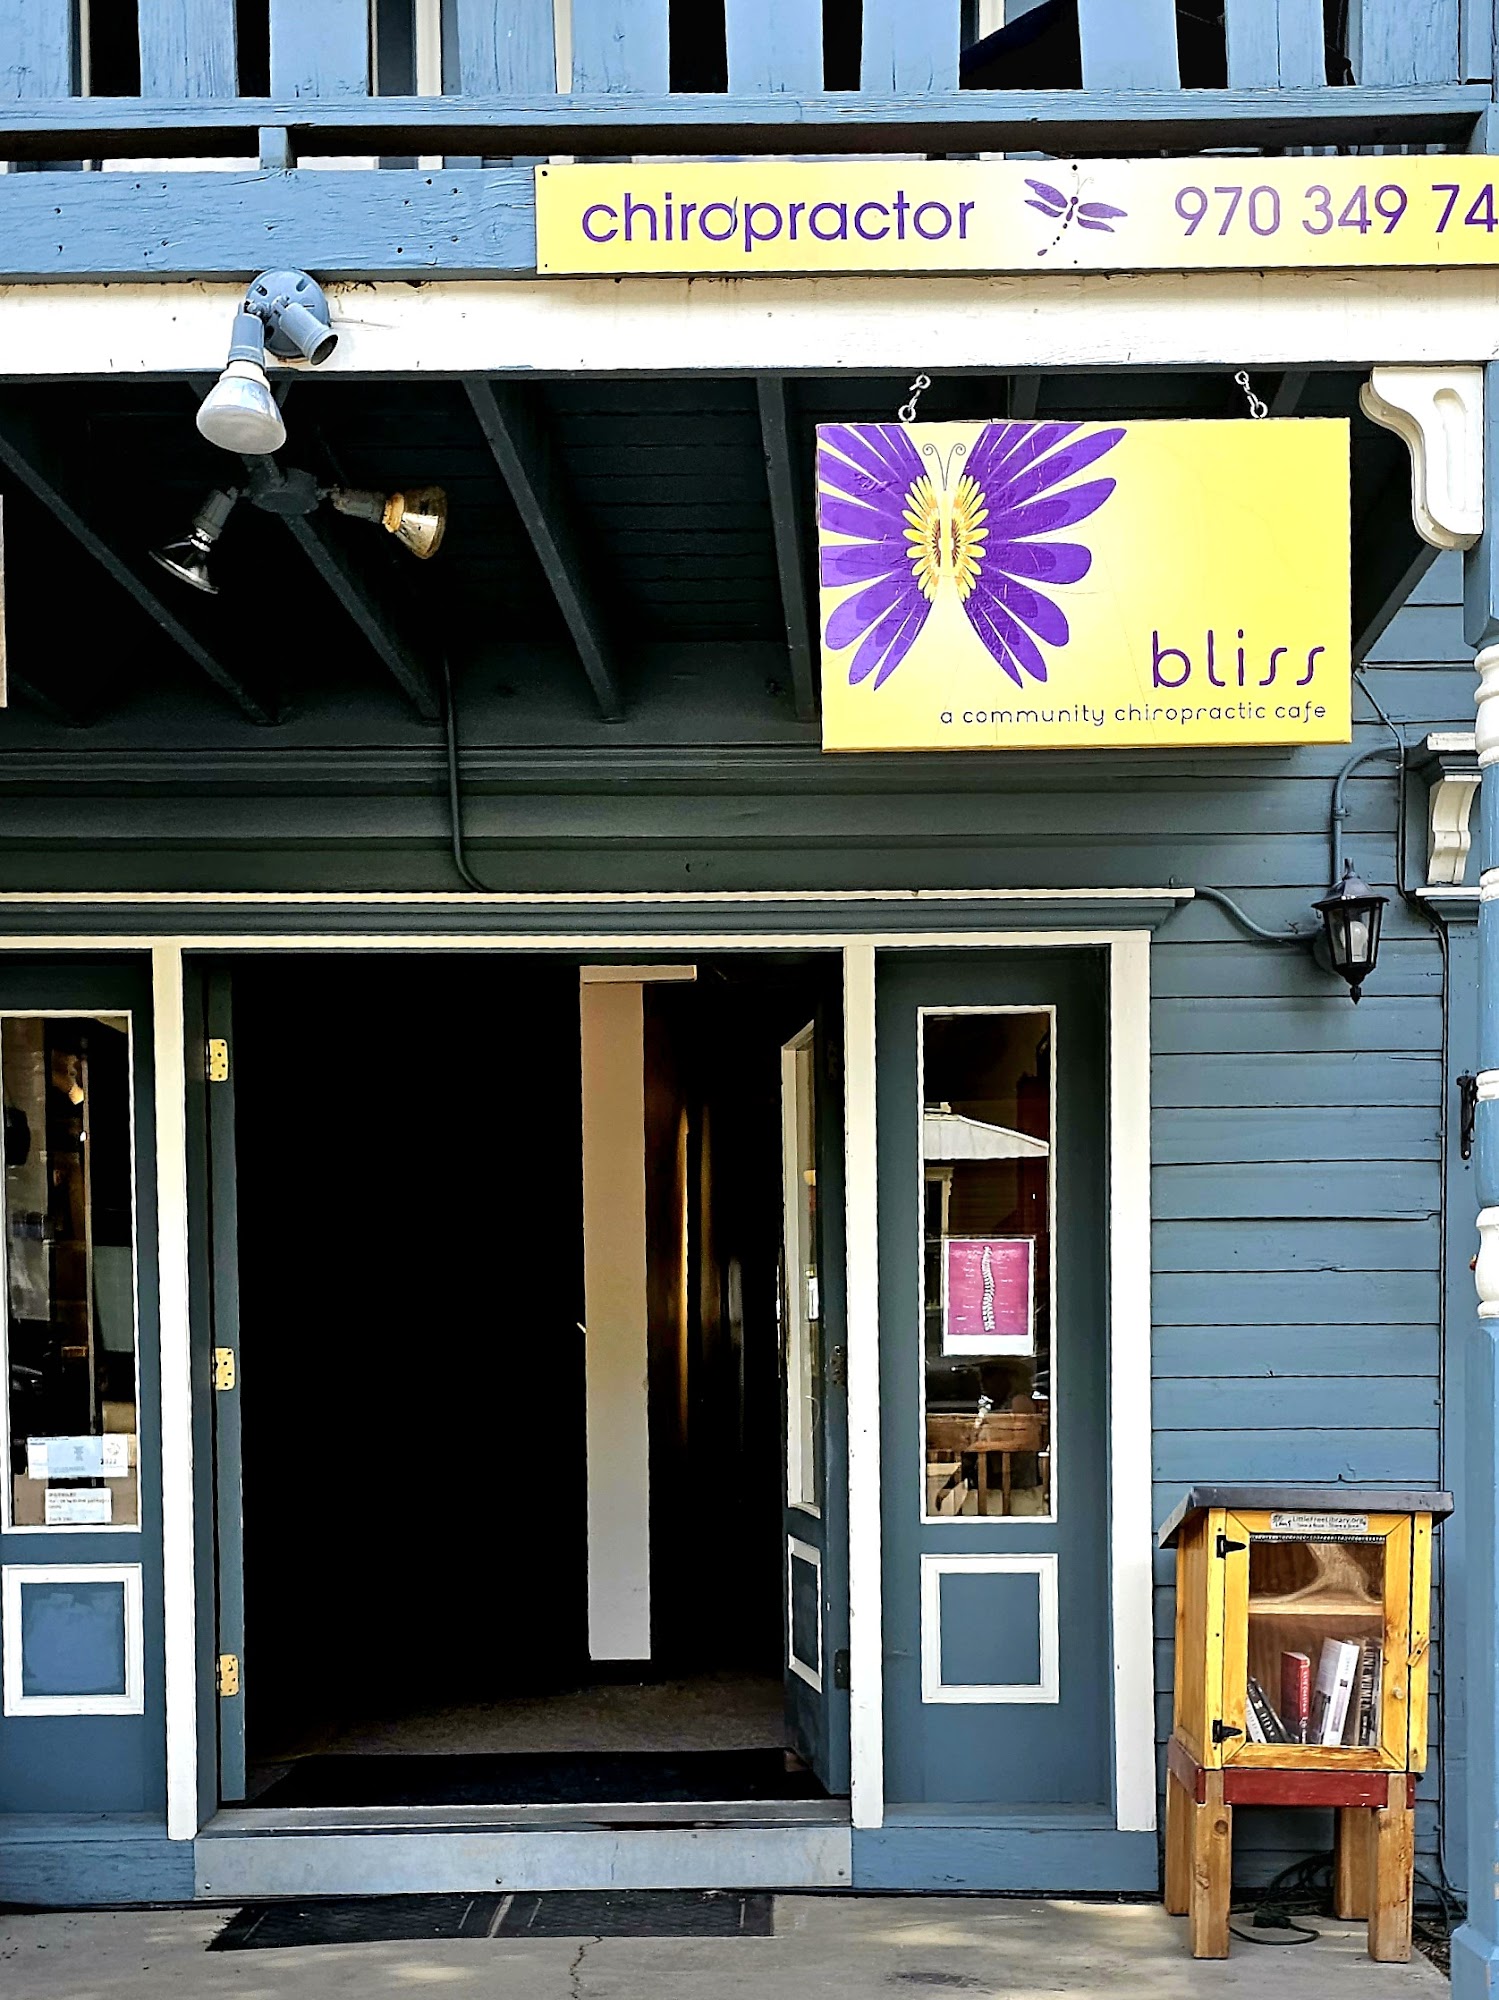 Bliss Community Chiropractic 111 Elk Ave, Crested Butte Colorado 81224